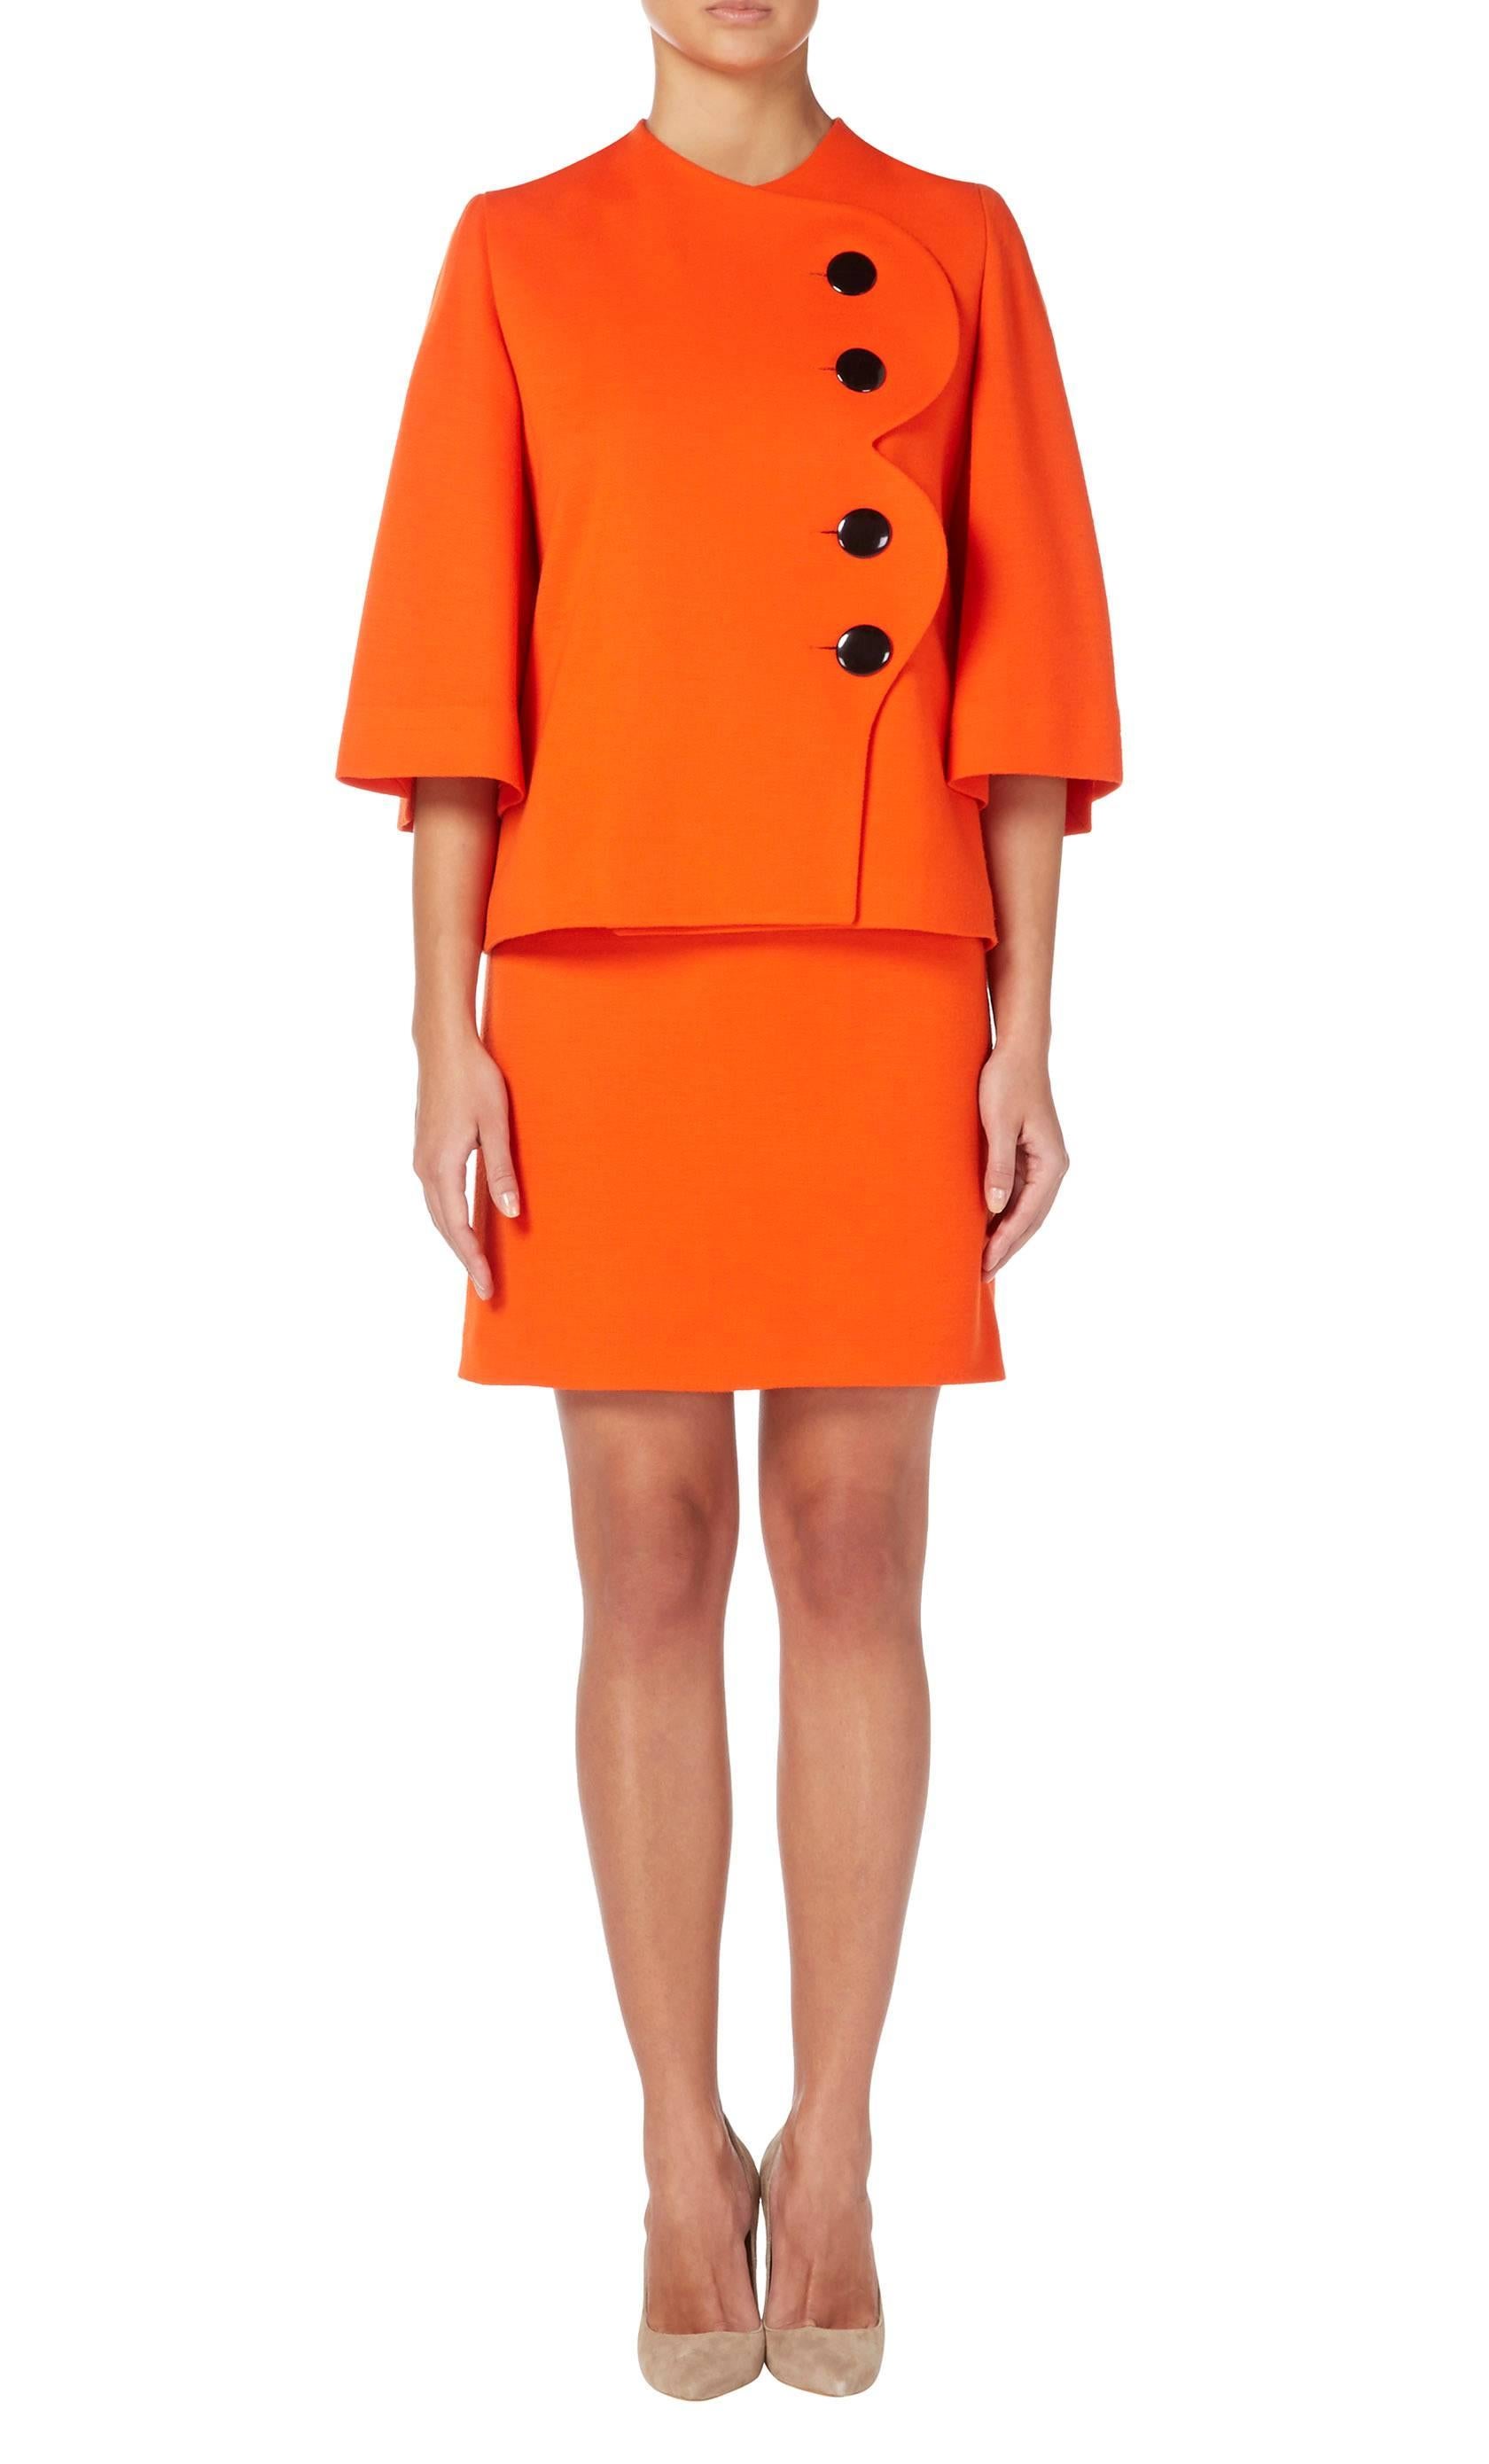 This bold Pierre Cardin skirt suit will make a colourful choice for the office or a daytime event. Constructed in vibrant orange wool, the jacket features split sleeves and a scalloped edge to the front, fastening with four overscale black buttons.